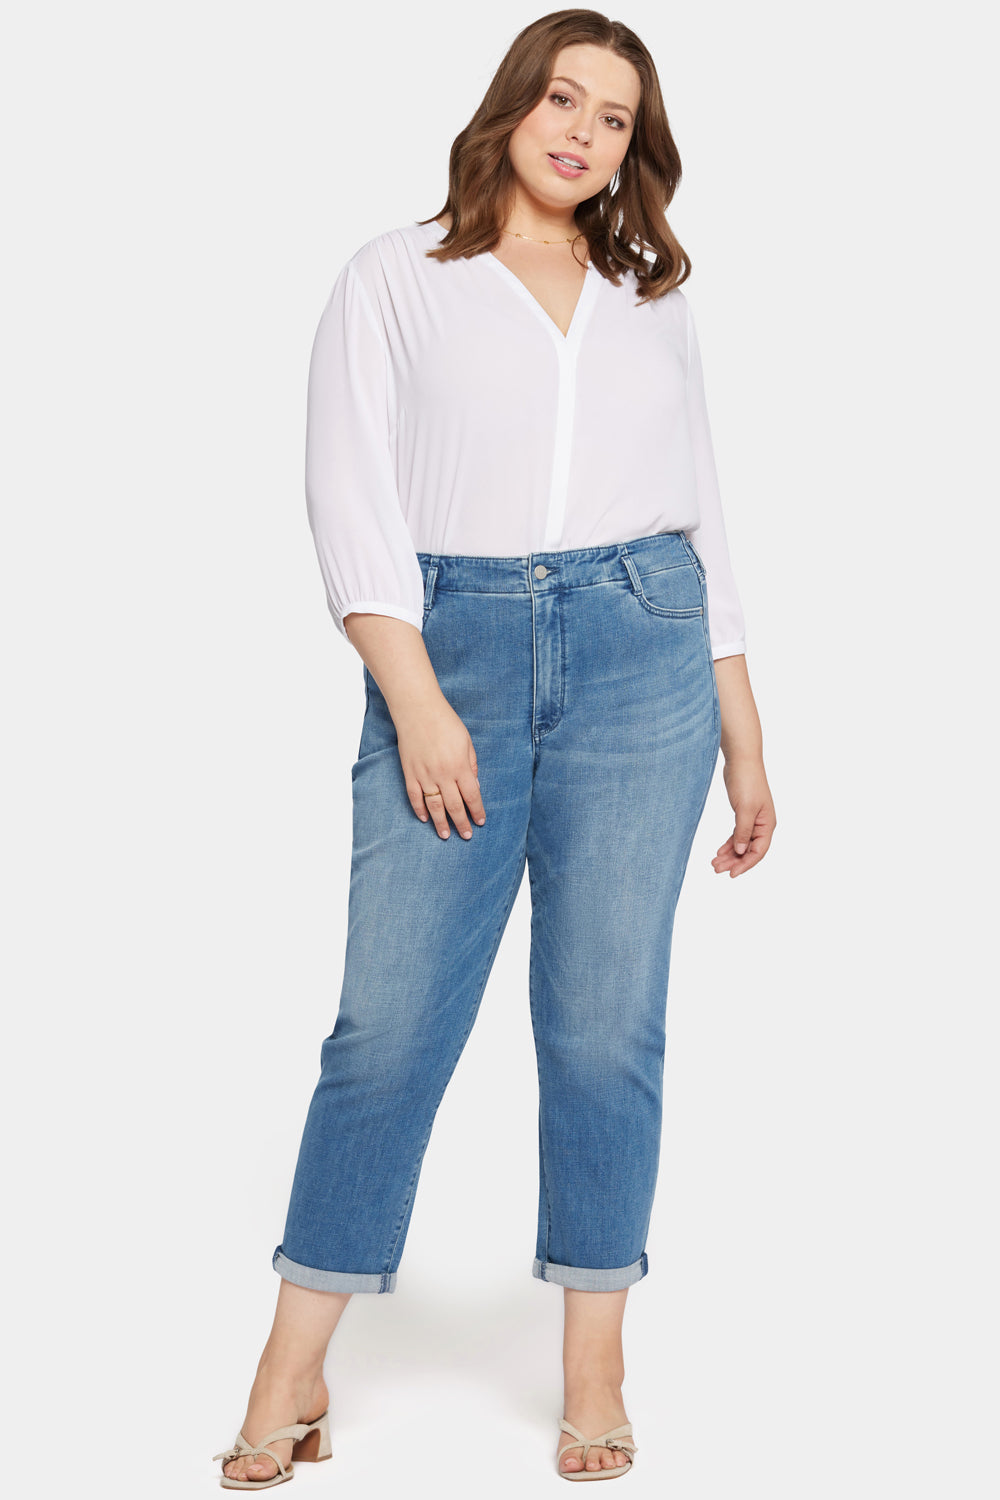 NYDJ Margot Girlfriend Jeans In Plus Size With High Rise - Stunning